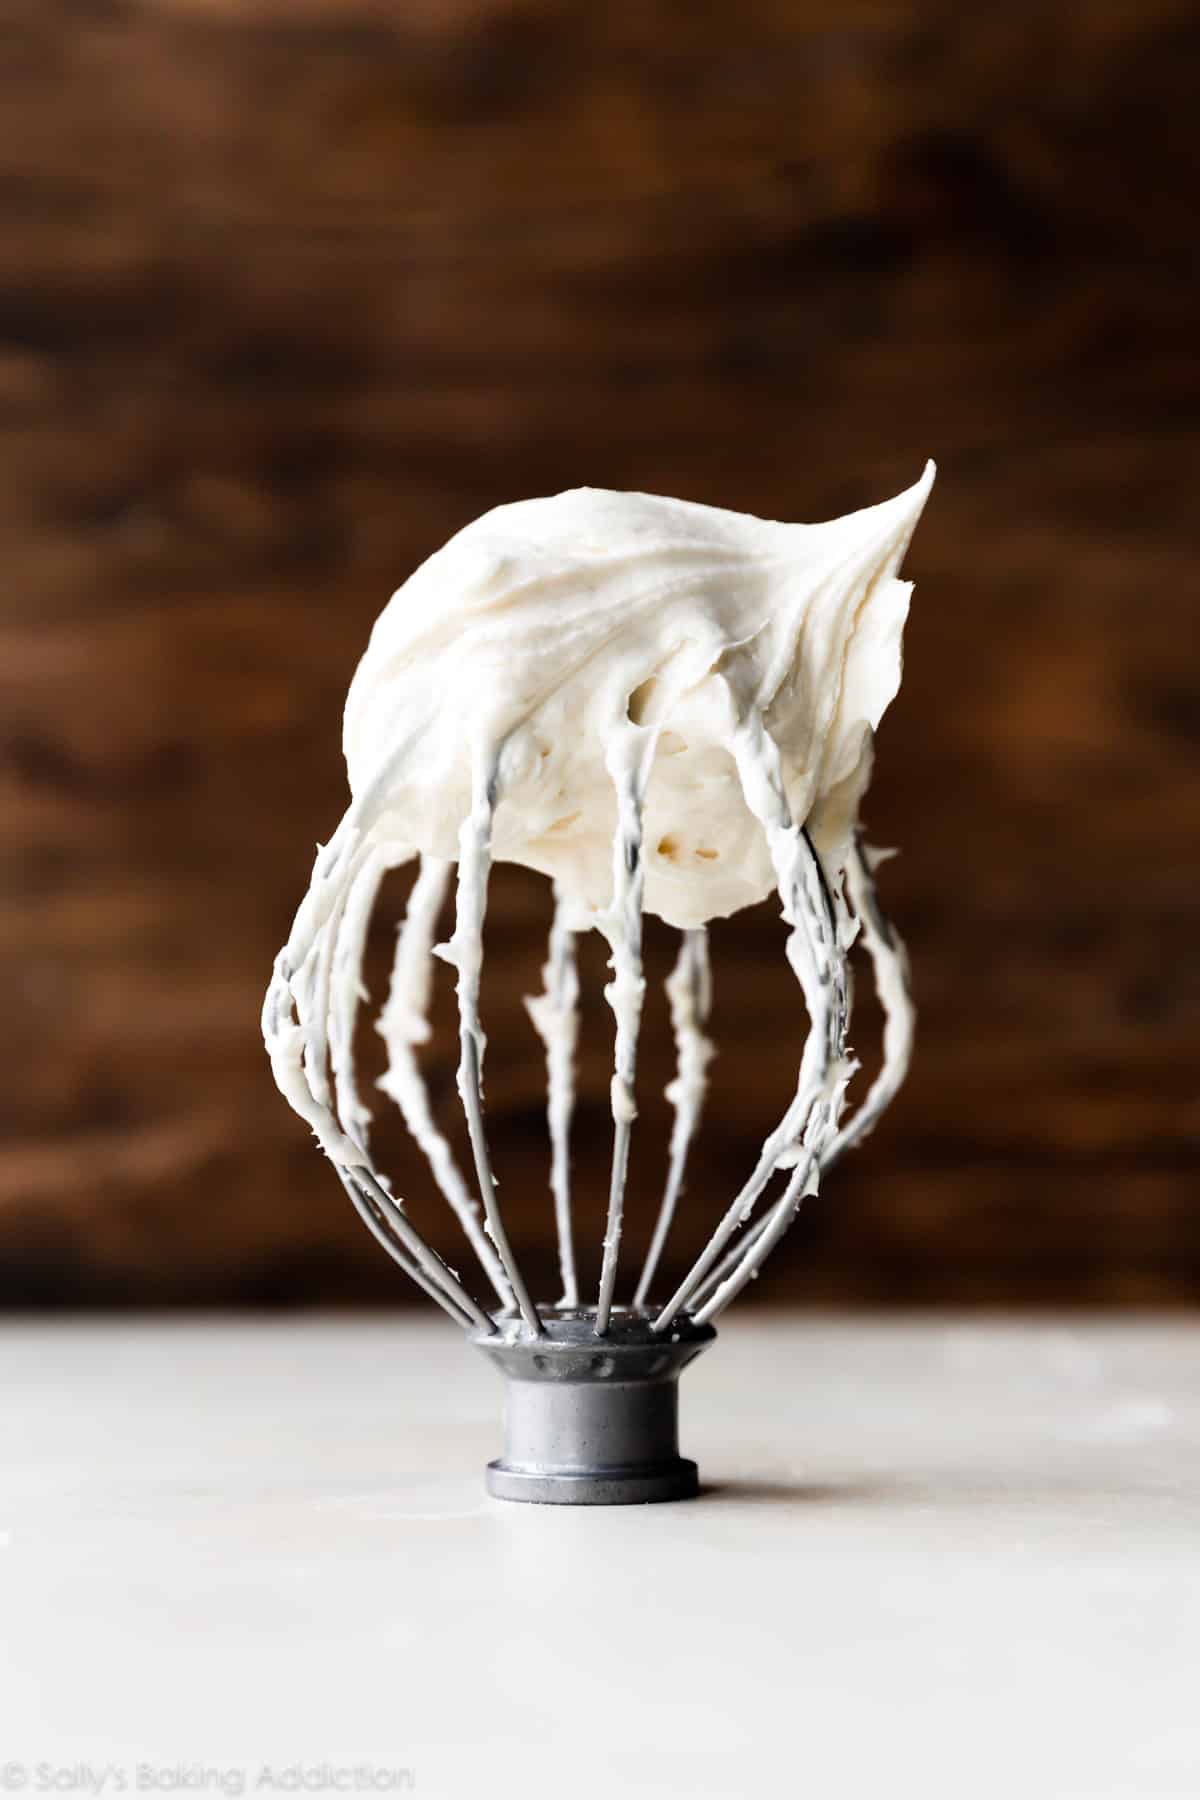 Cream cheese buttercream frosting on whisk